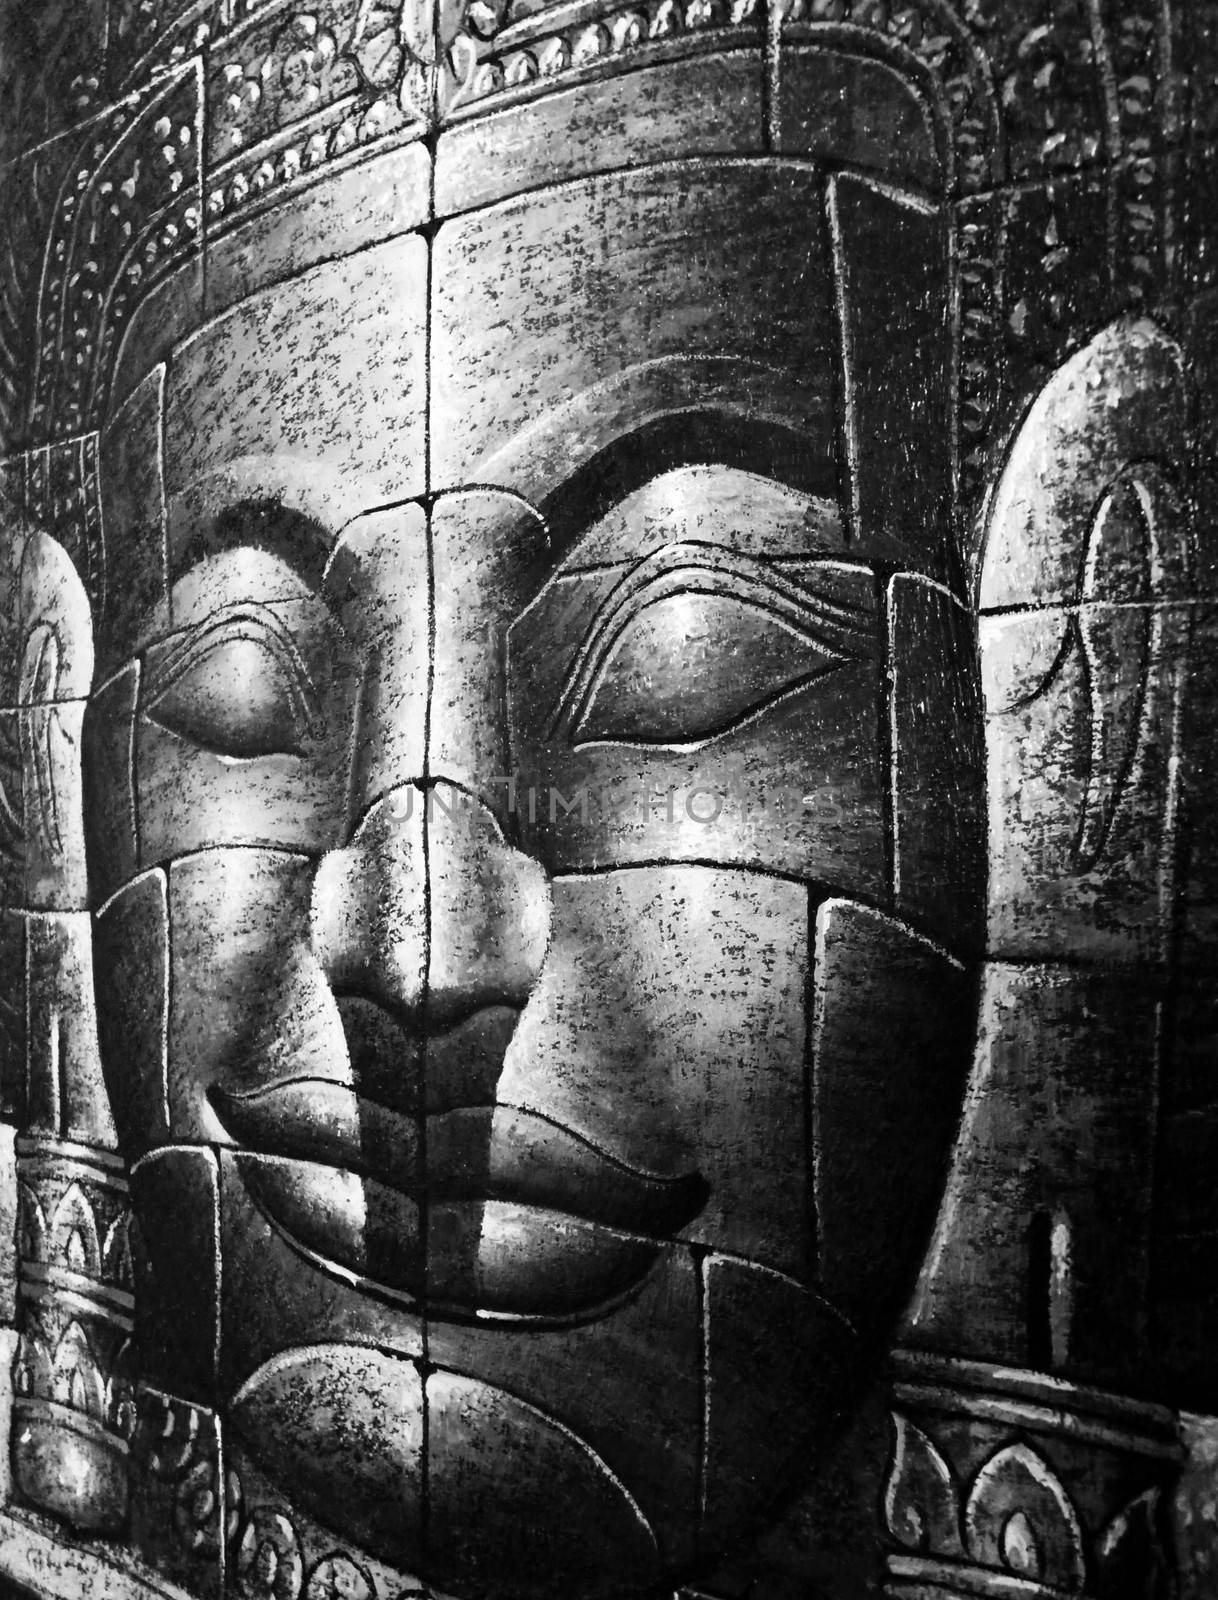 Black and White Cambodian Buddha Face Picture Close Up